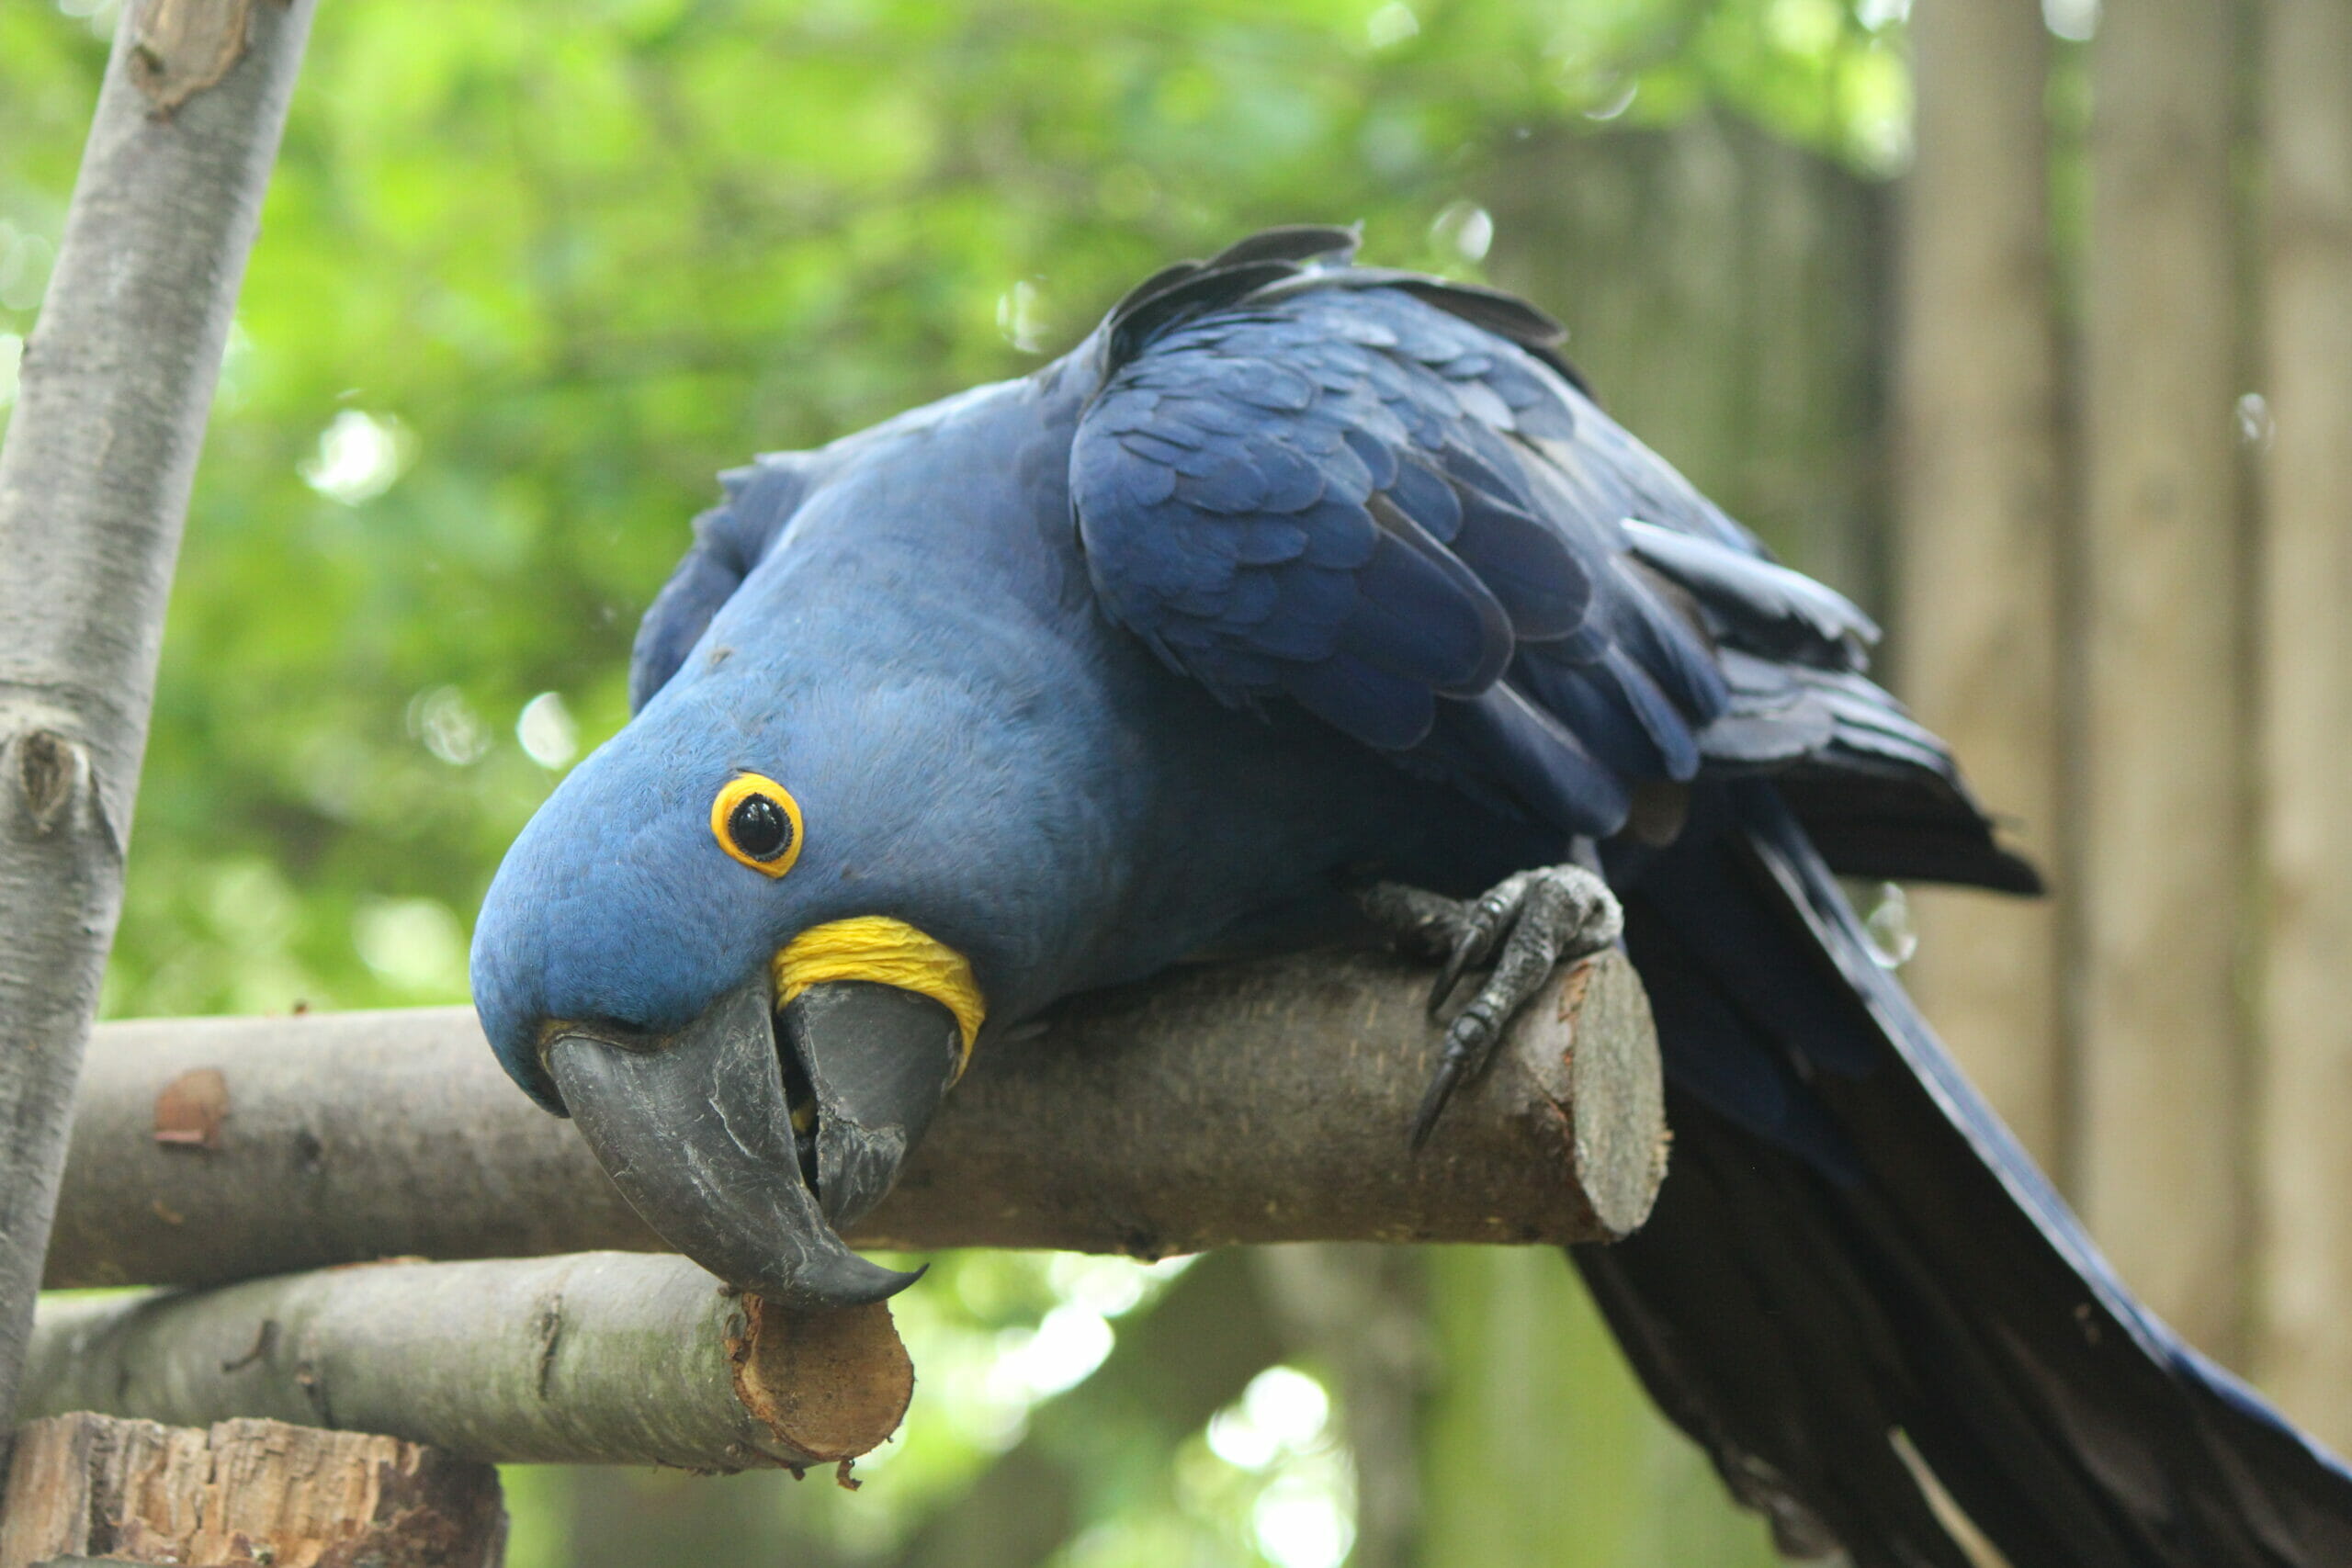 The Lifespan of Macaws in Captivity: A Comprehensive Study